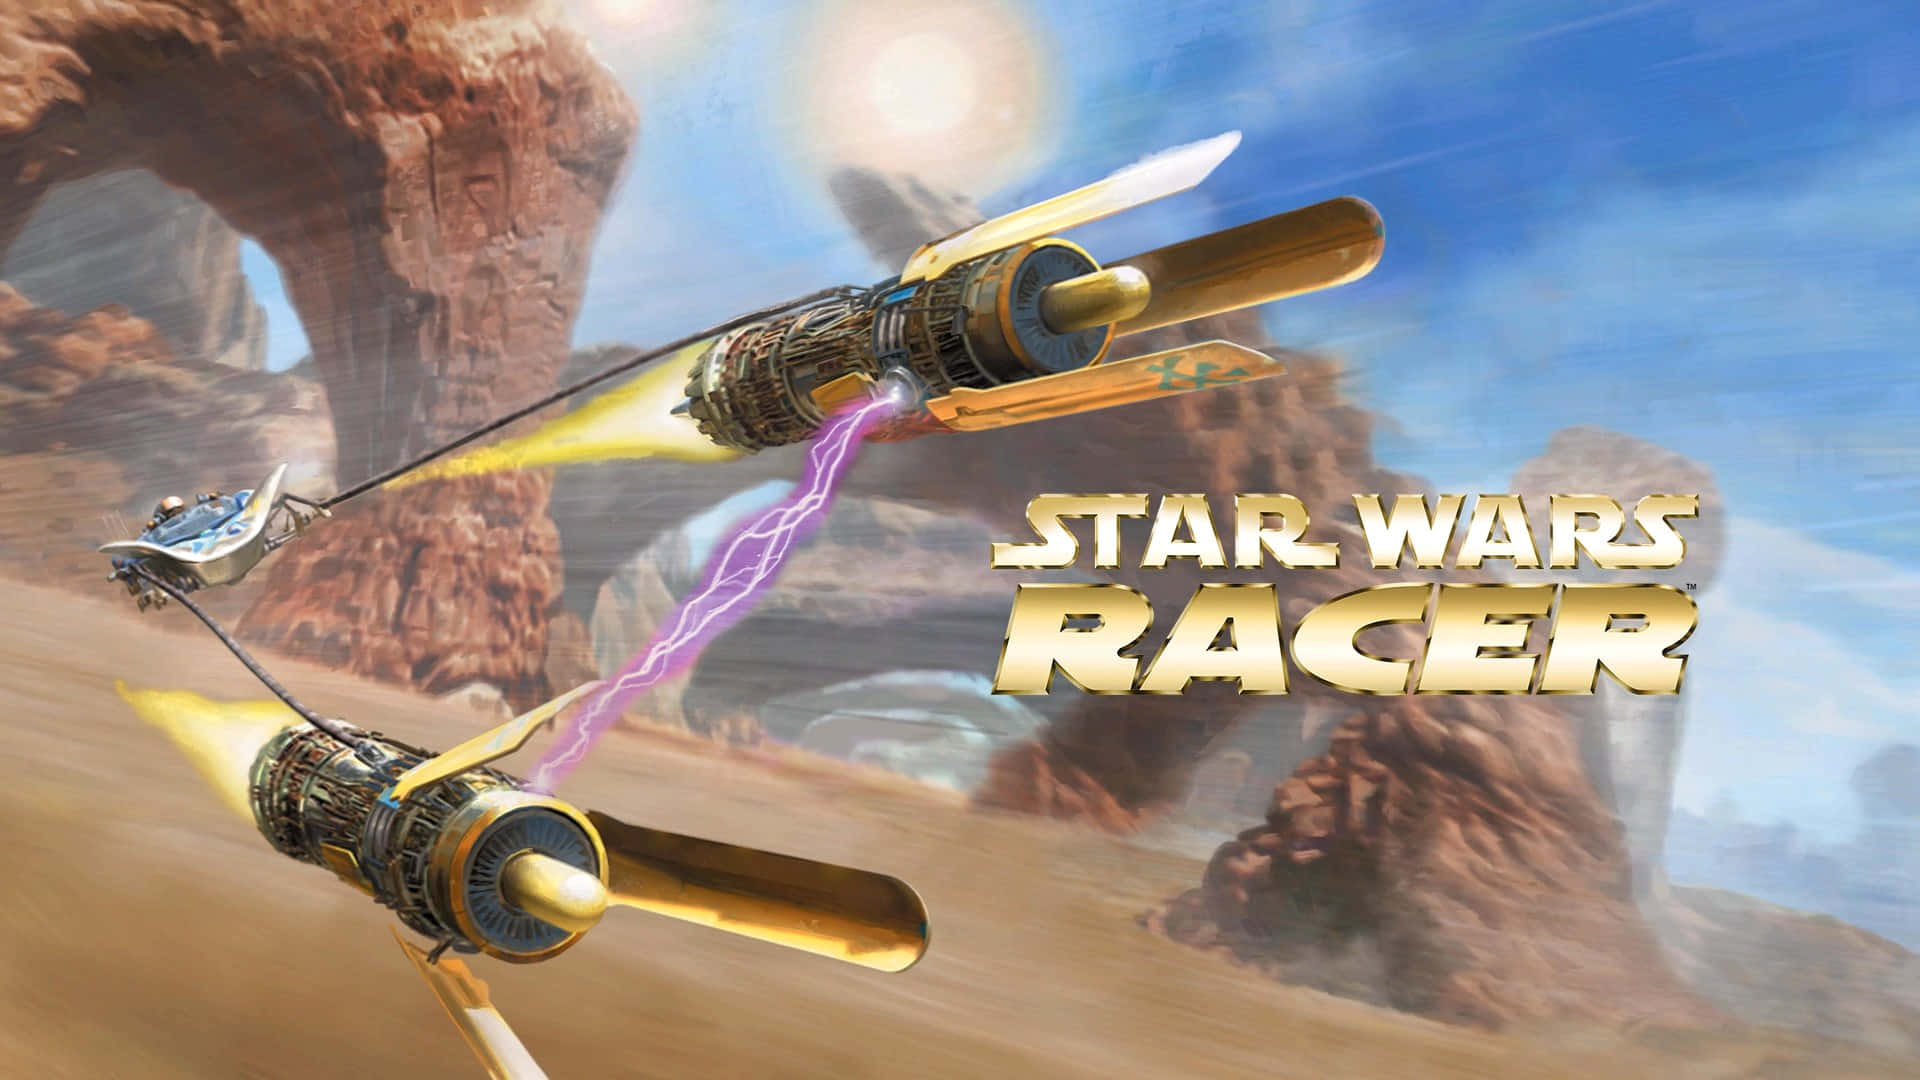 High-speed Podracing action in the Star Wars universe Wallpaper